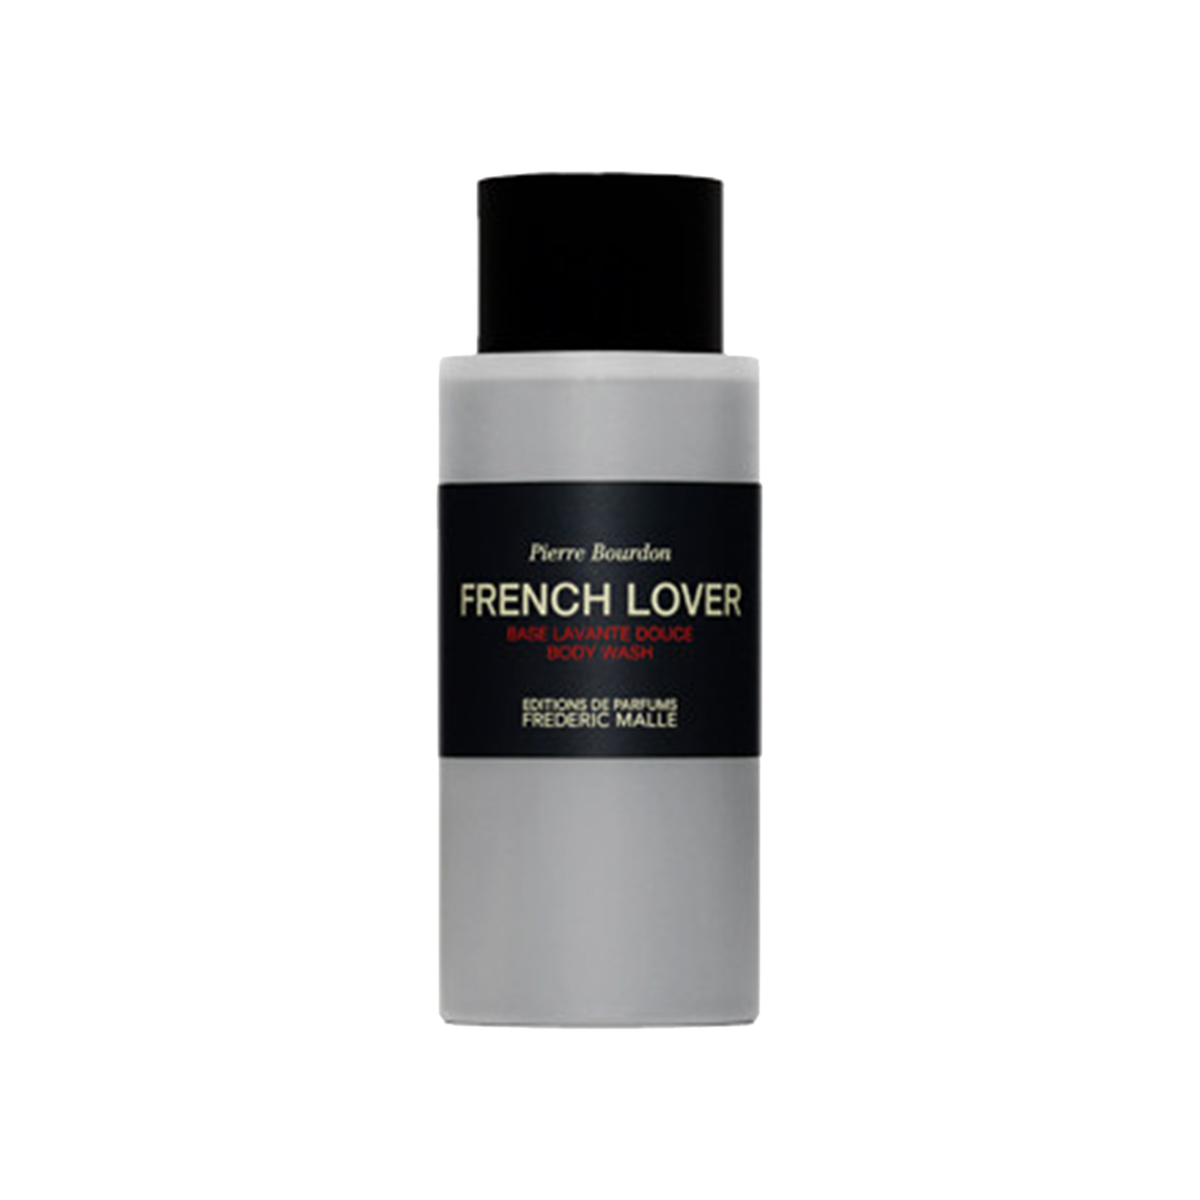 Frederic Malle - French Lover Body Wash